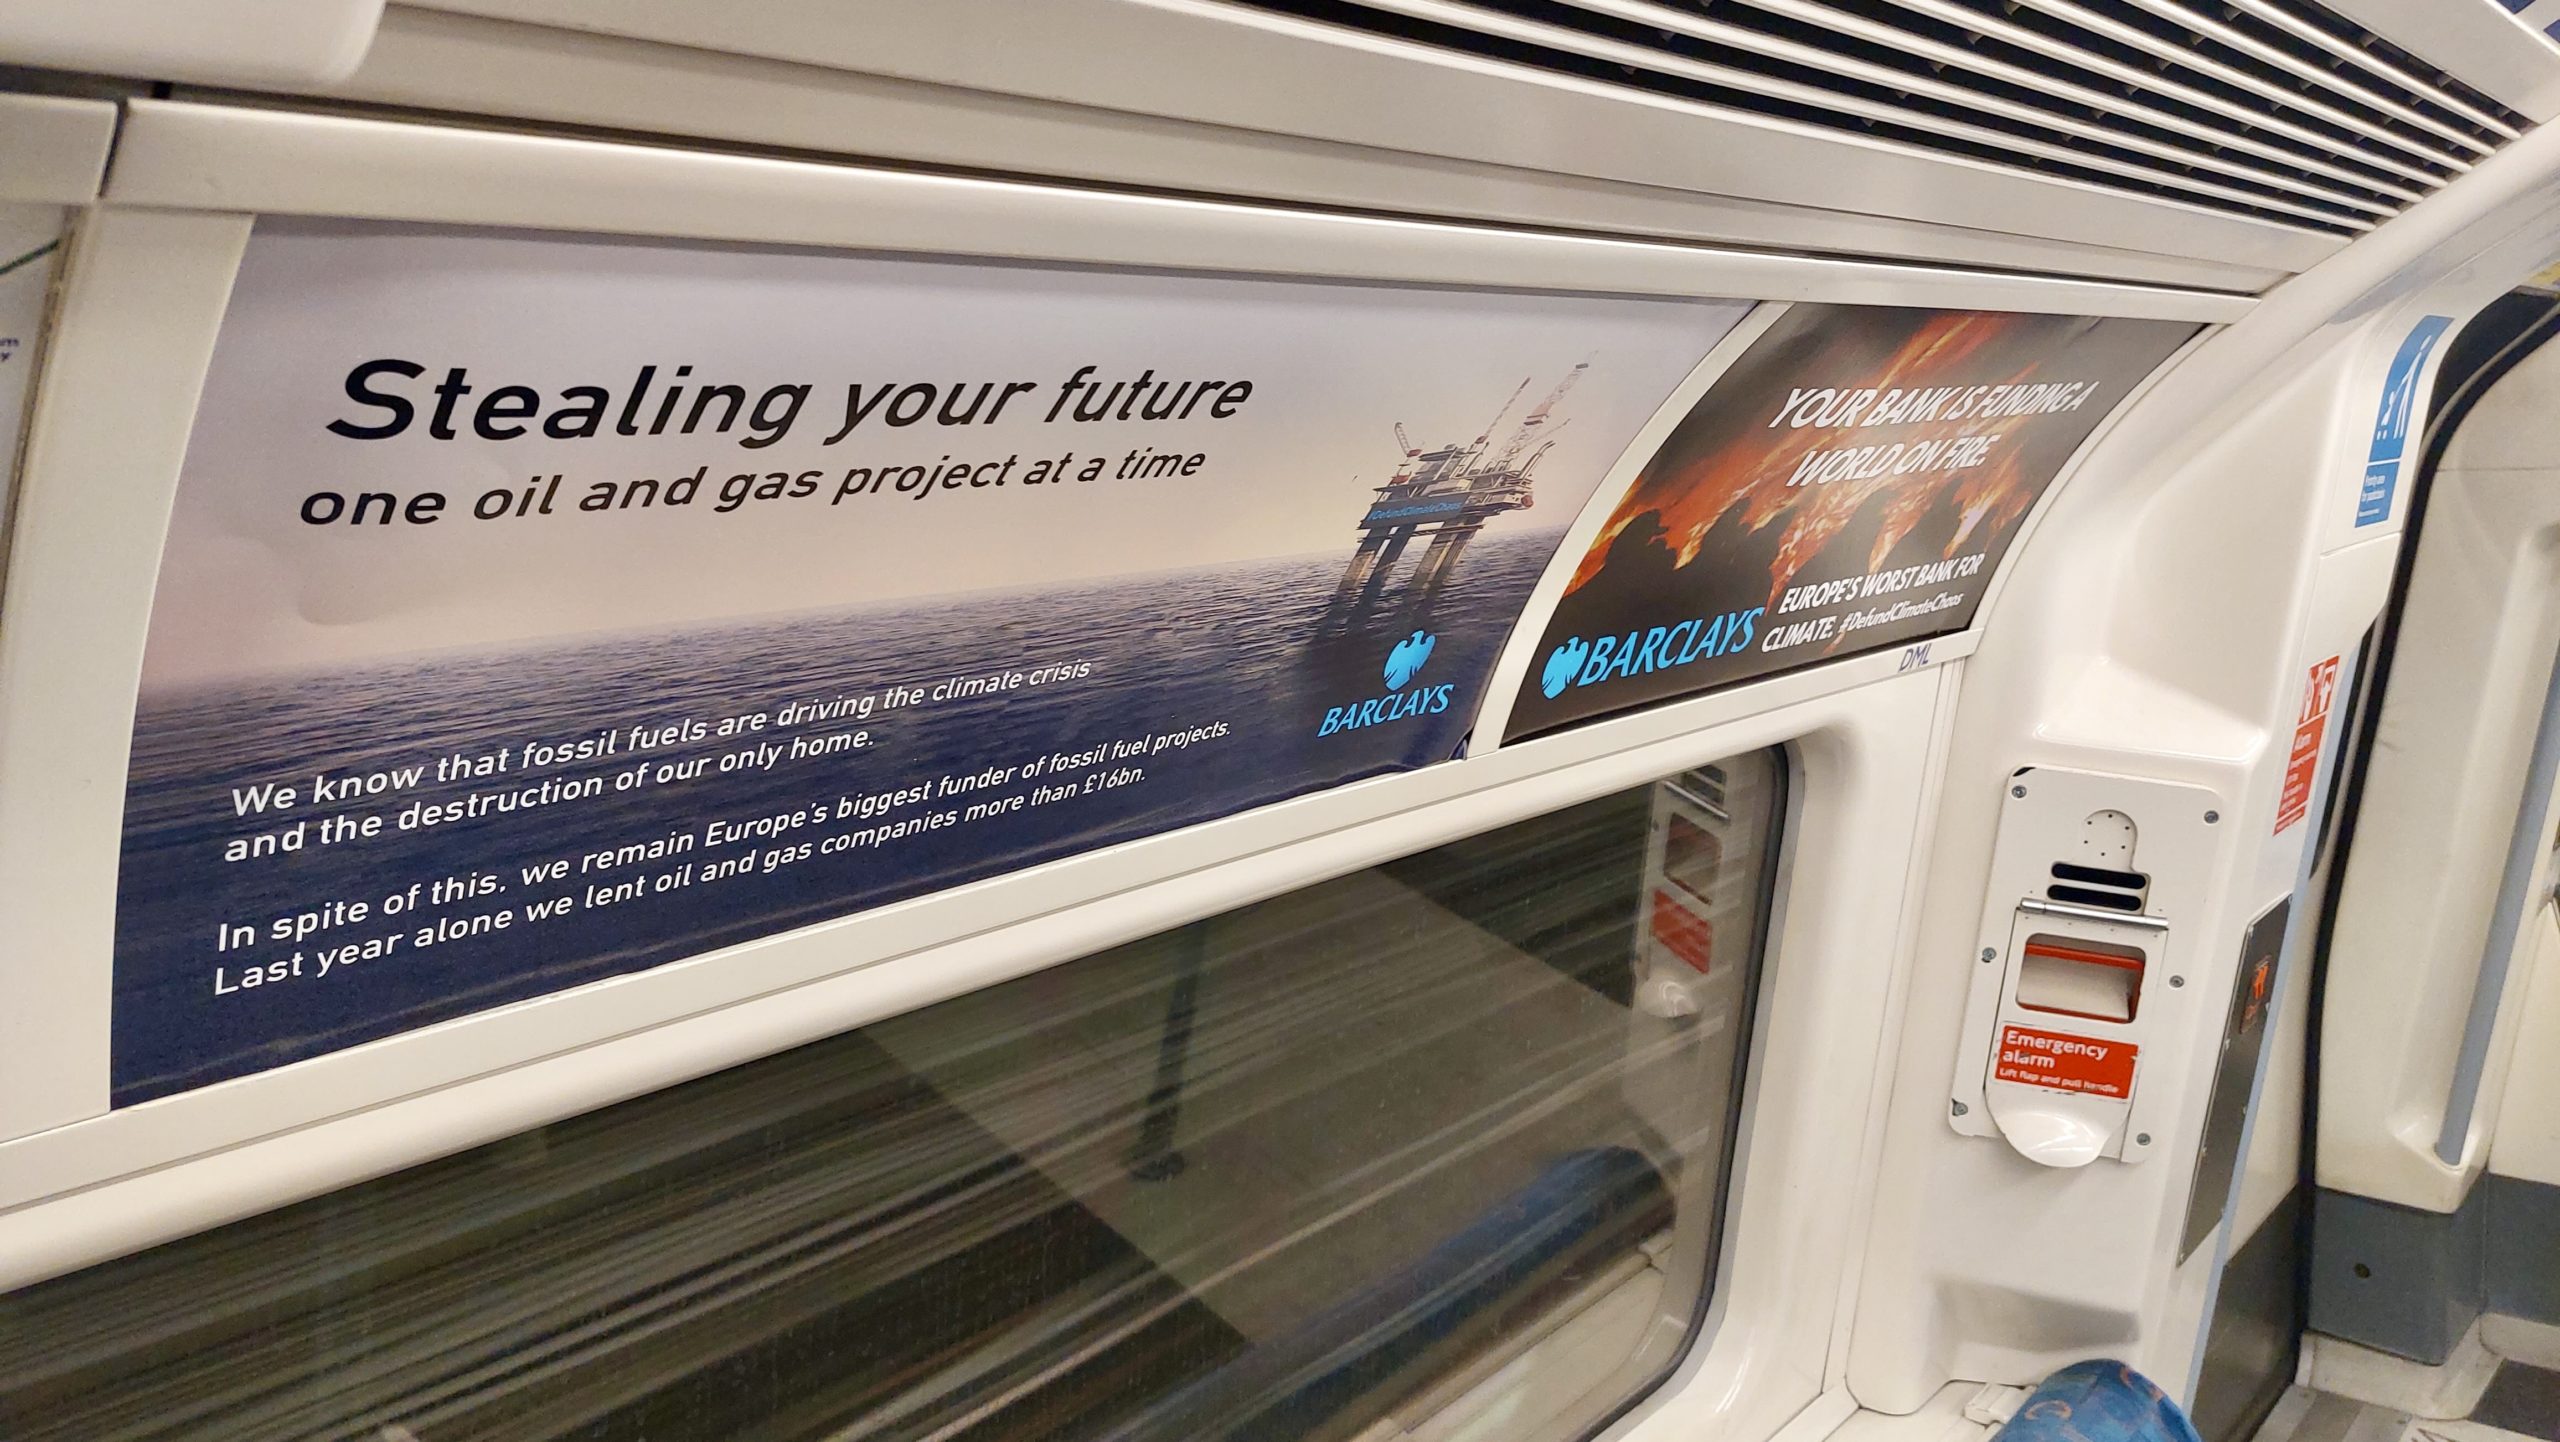 "Stealing your future one oil and gas project at a time" states the spoof advert plastered on the underground